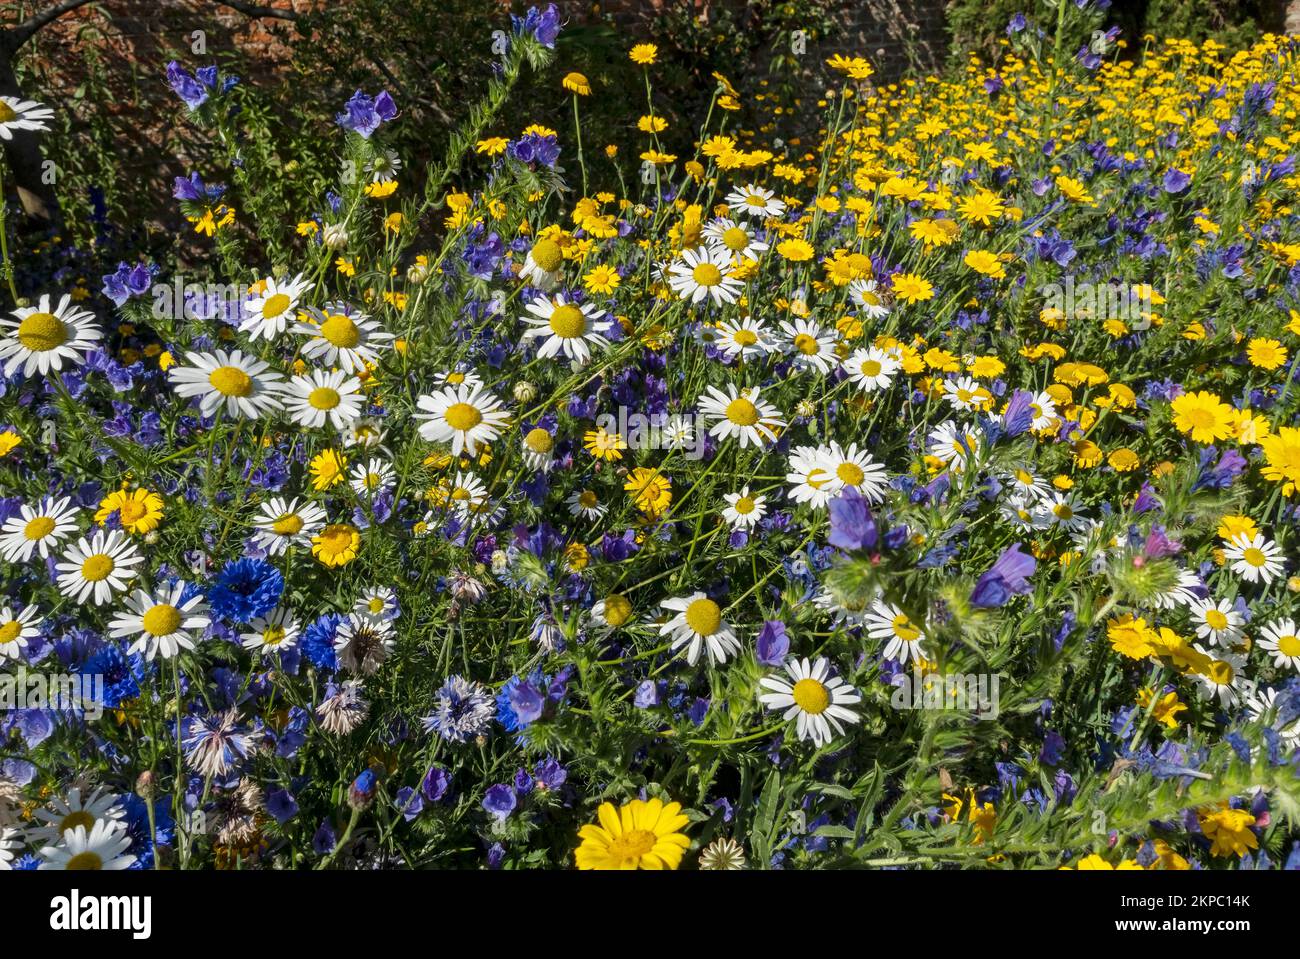 Yellow corn marigolds white daisies and blue echium flowers growing in a wildflower wildflowers meadow garden border in summer England UK Britain Stock Photo